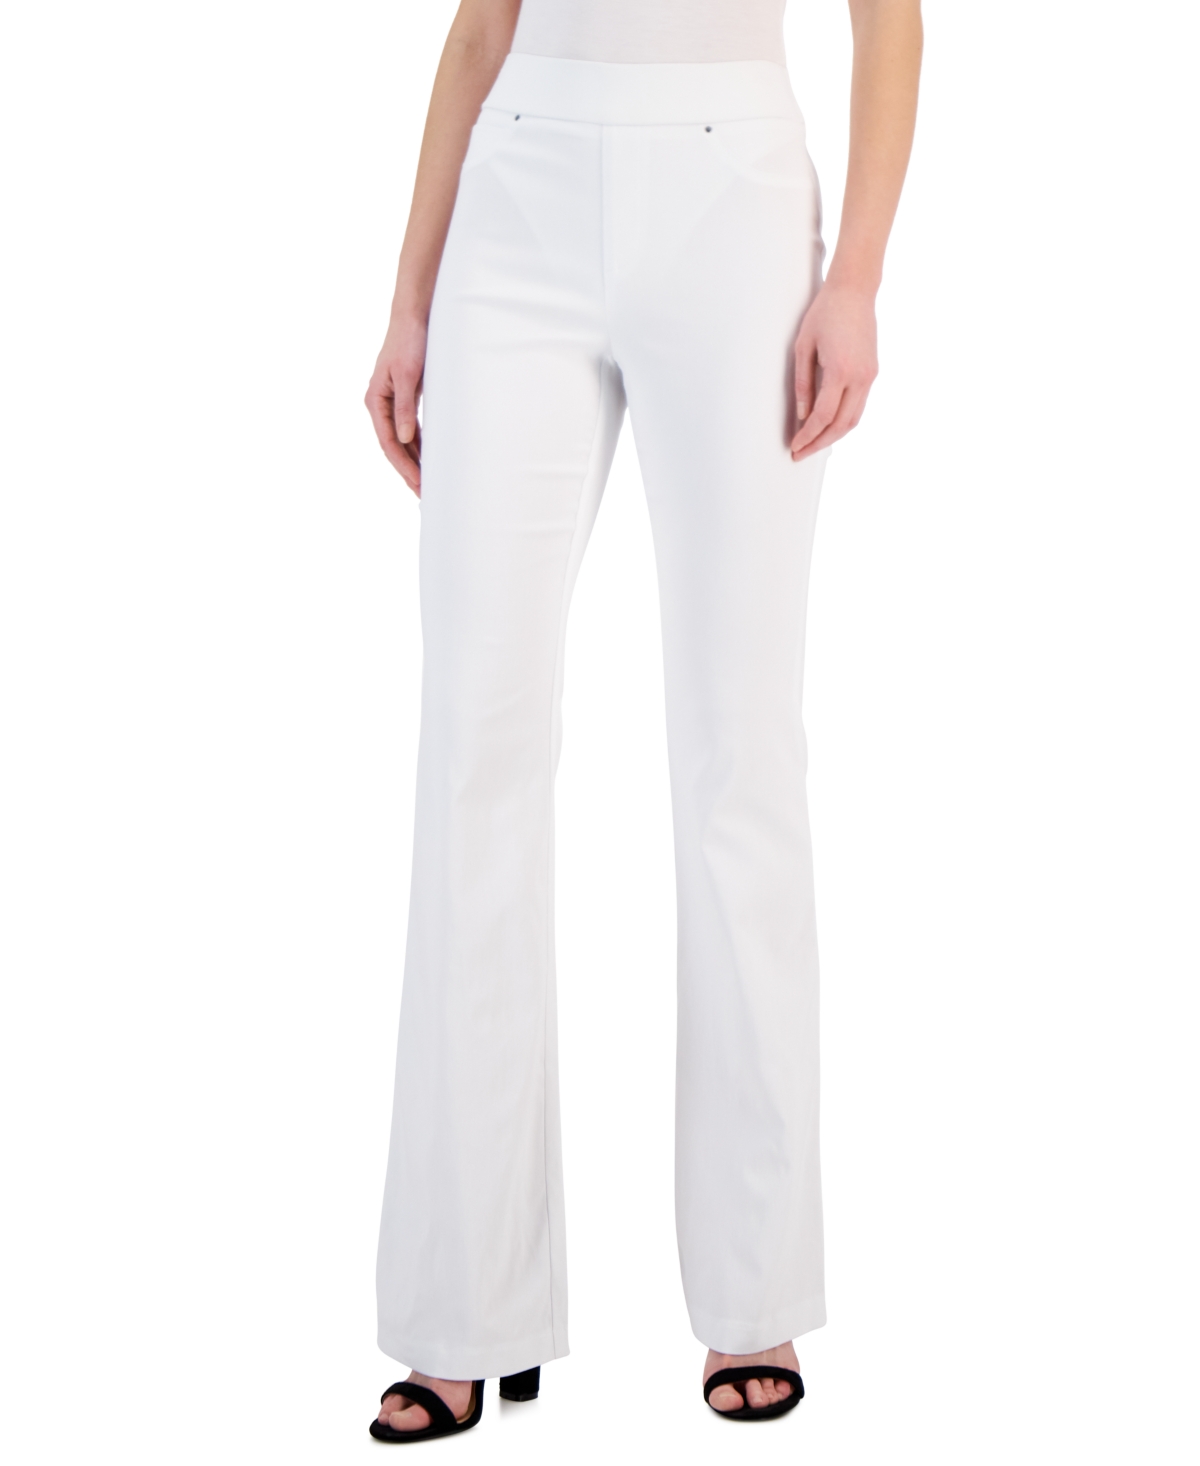 Women's High-Rise Pull-On Flare-Leg Pants, Created for Macy's - Bright White